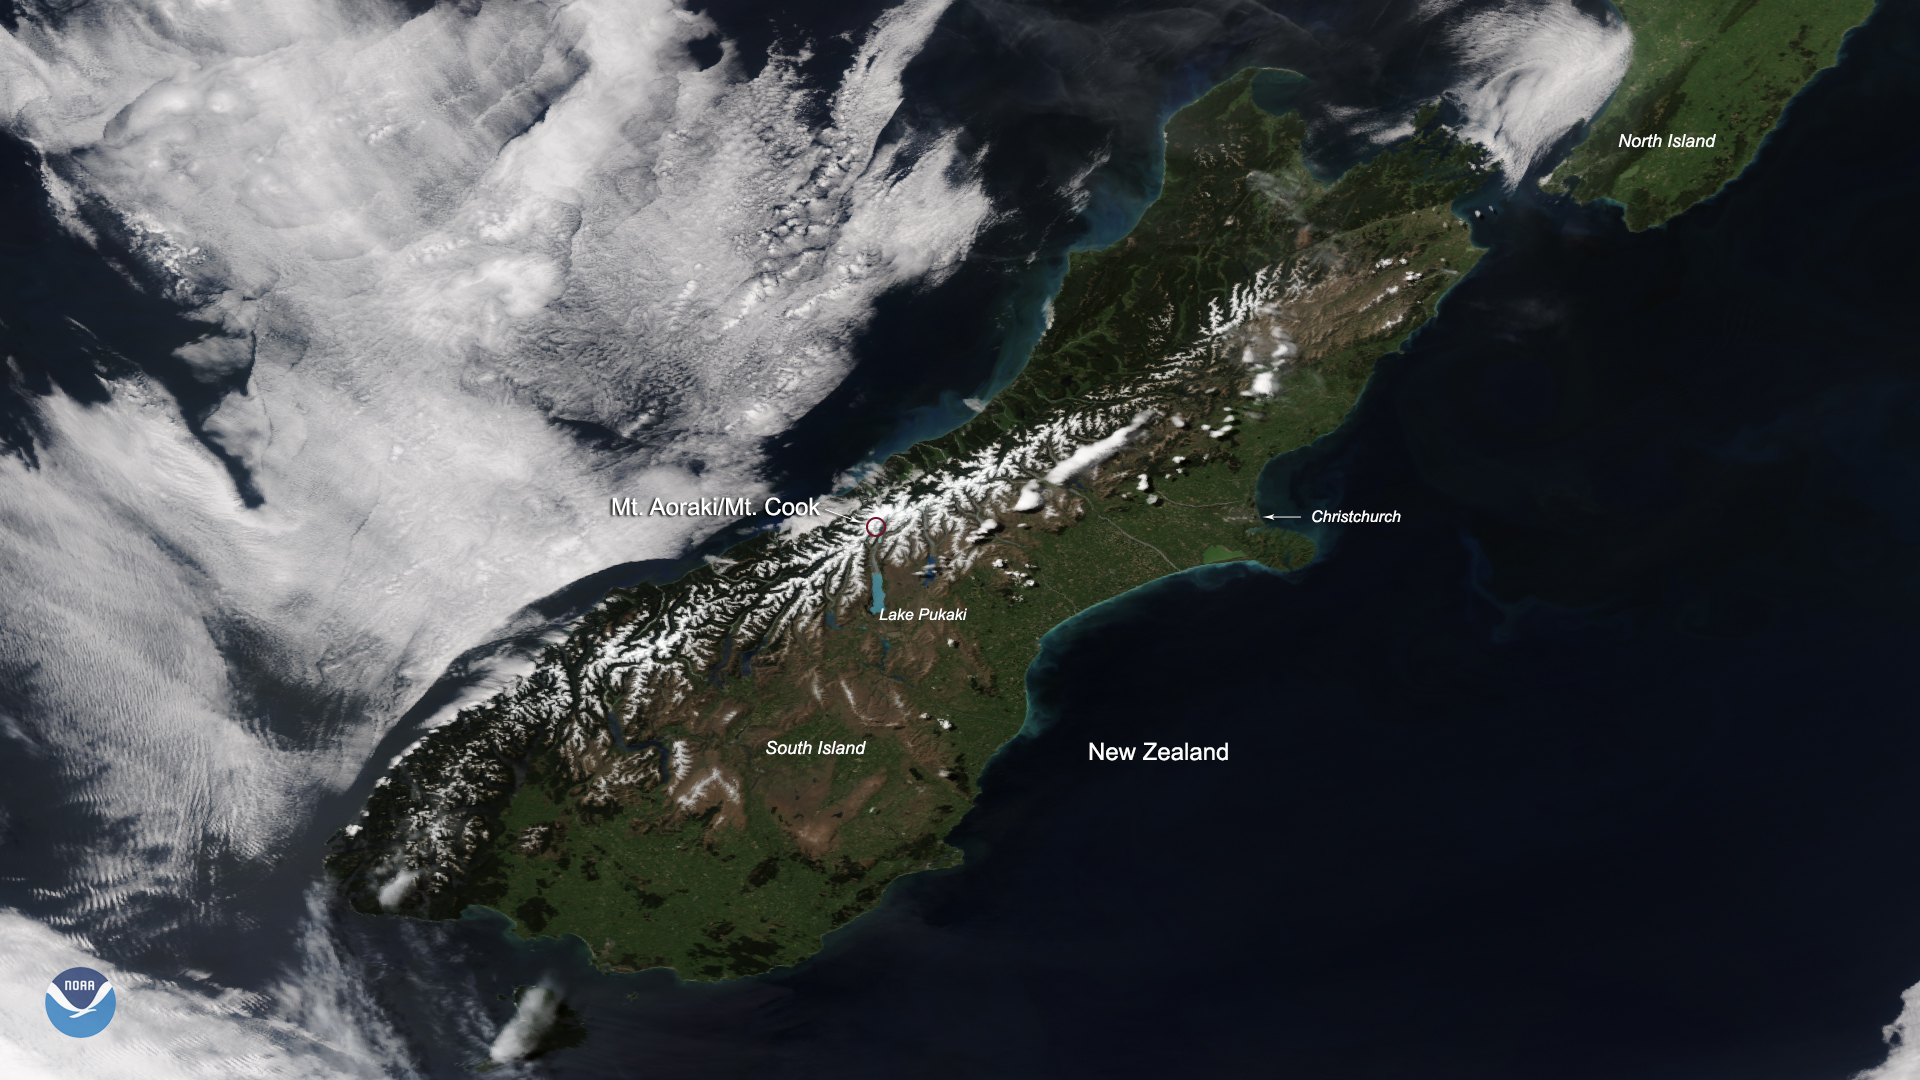 NOAA-20 Sees Snow-Capped Peaks of New Zealand’s Southern Alps